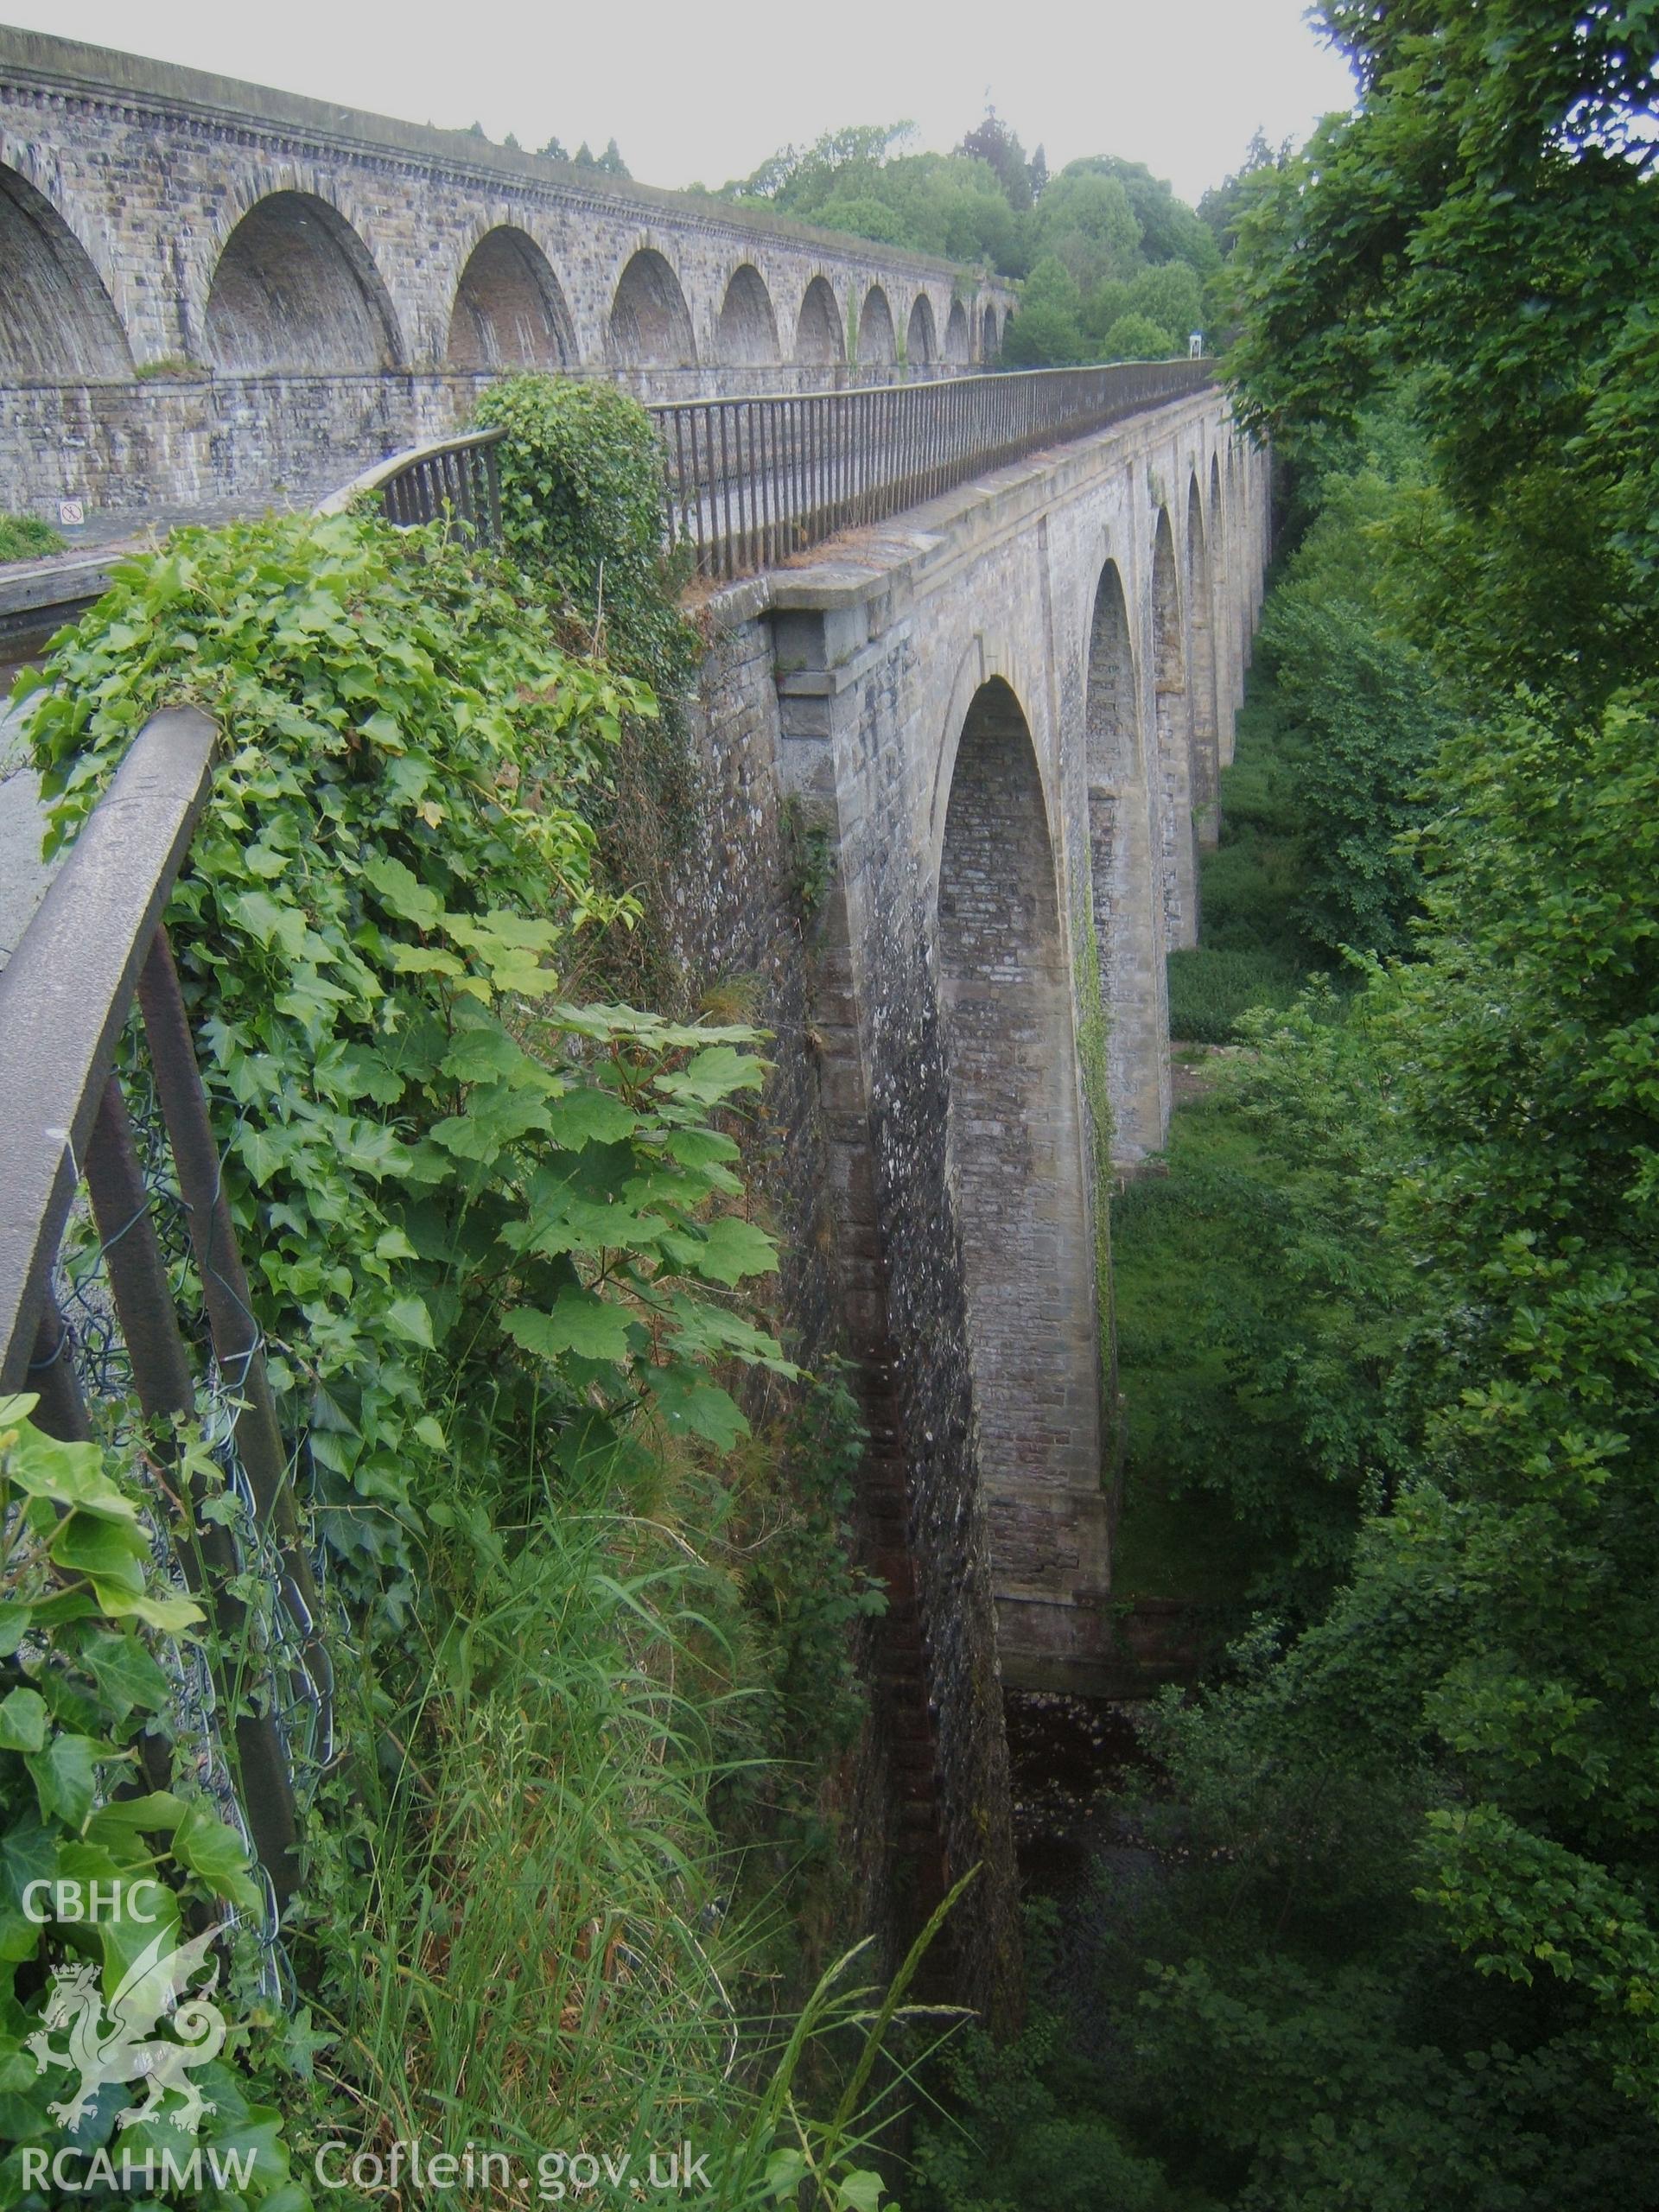 North-east elevations of Chirk Aqueduct and Viaduct from the south-east abutment.